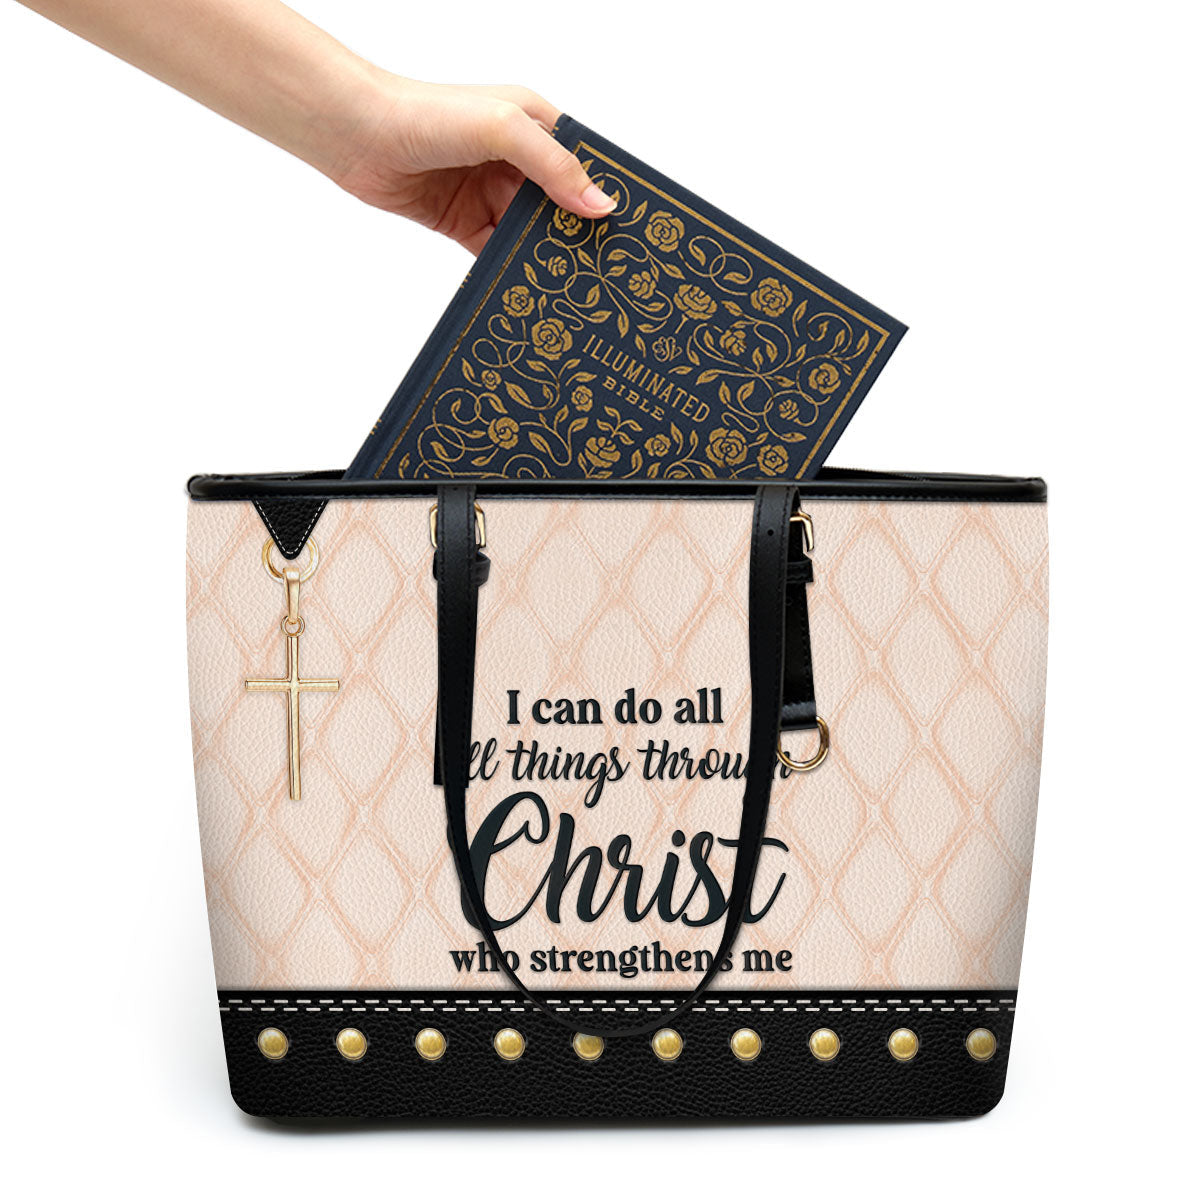 I Can Do All Things Through Christ Large Leather Tote Bag - Christ Gifts For Religious Women - Best Mother's Day Gifts